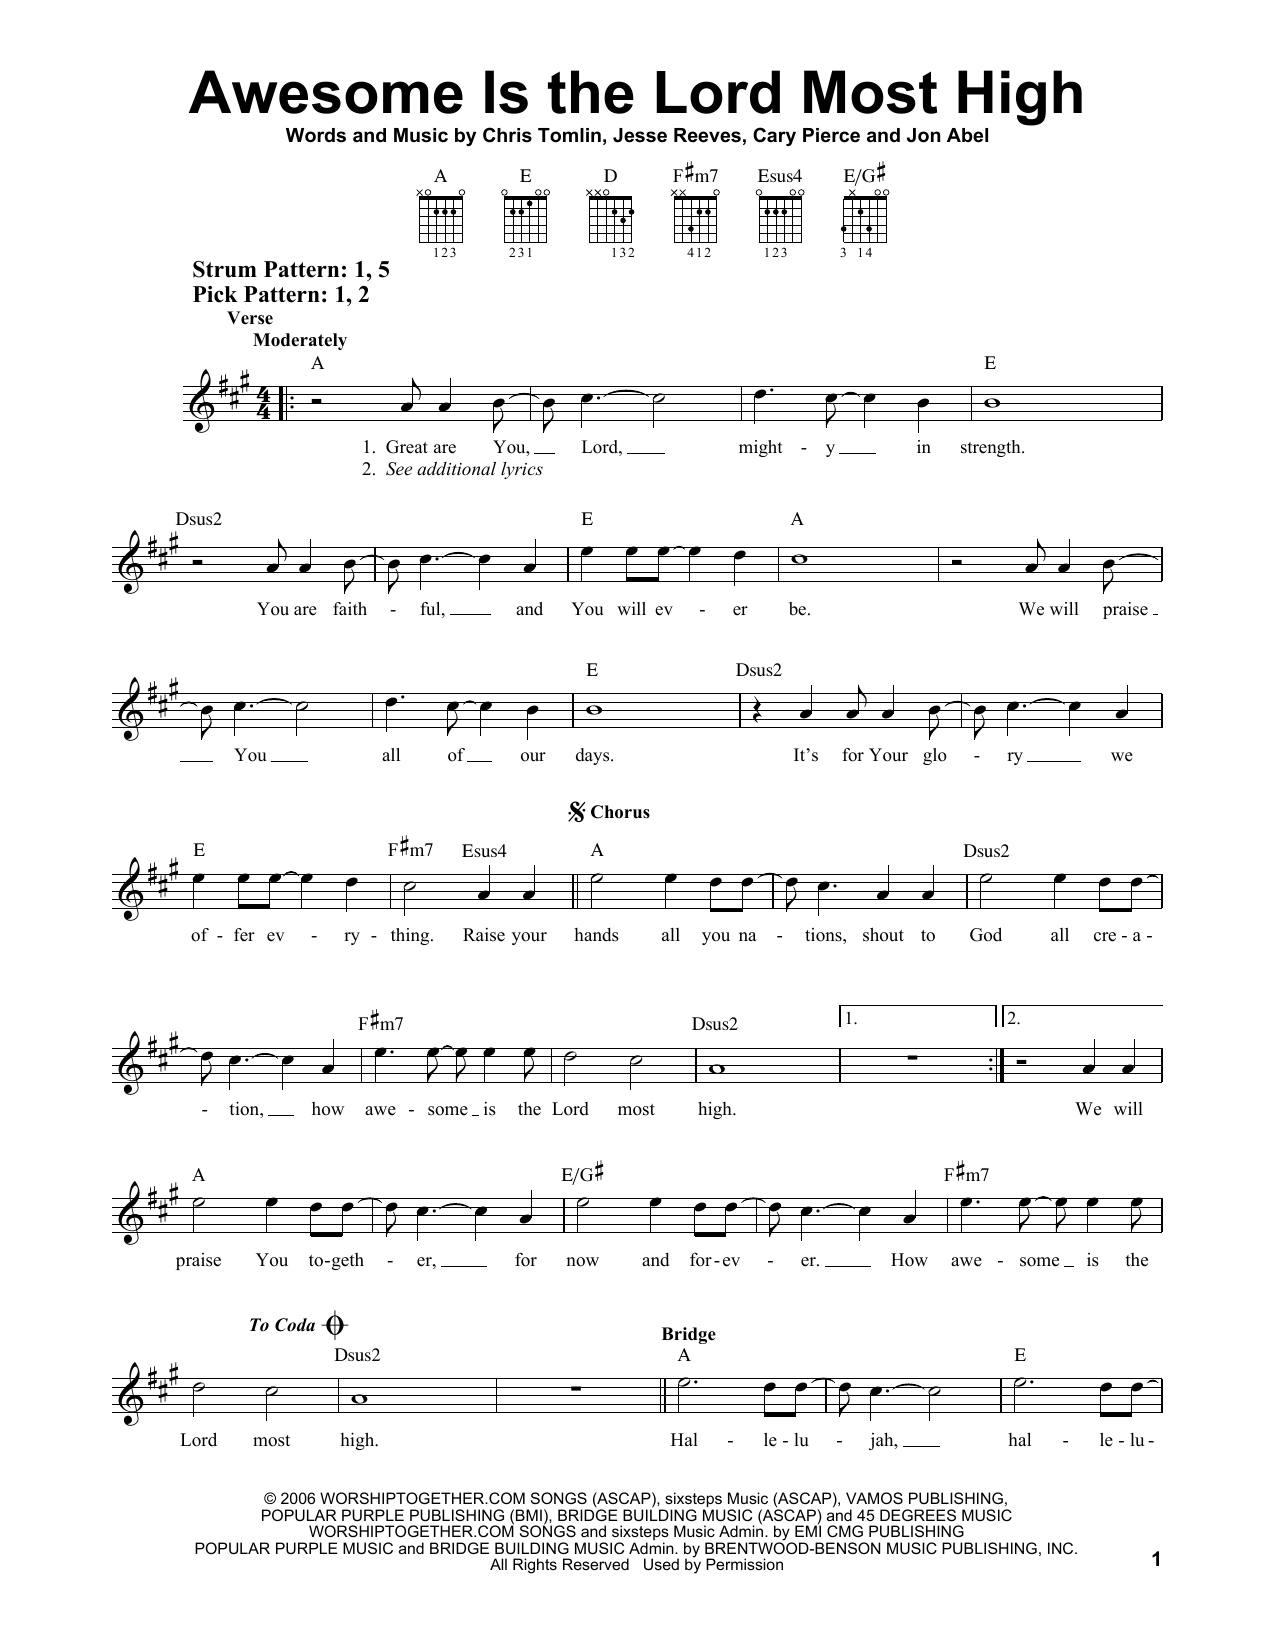 Download Chris Tomlin Awesome Is The Lord Most High Sheet Music